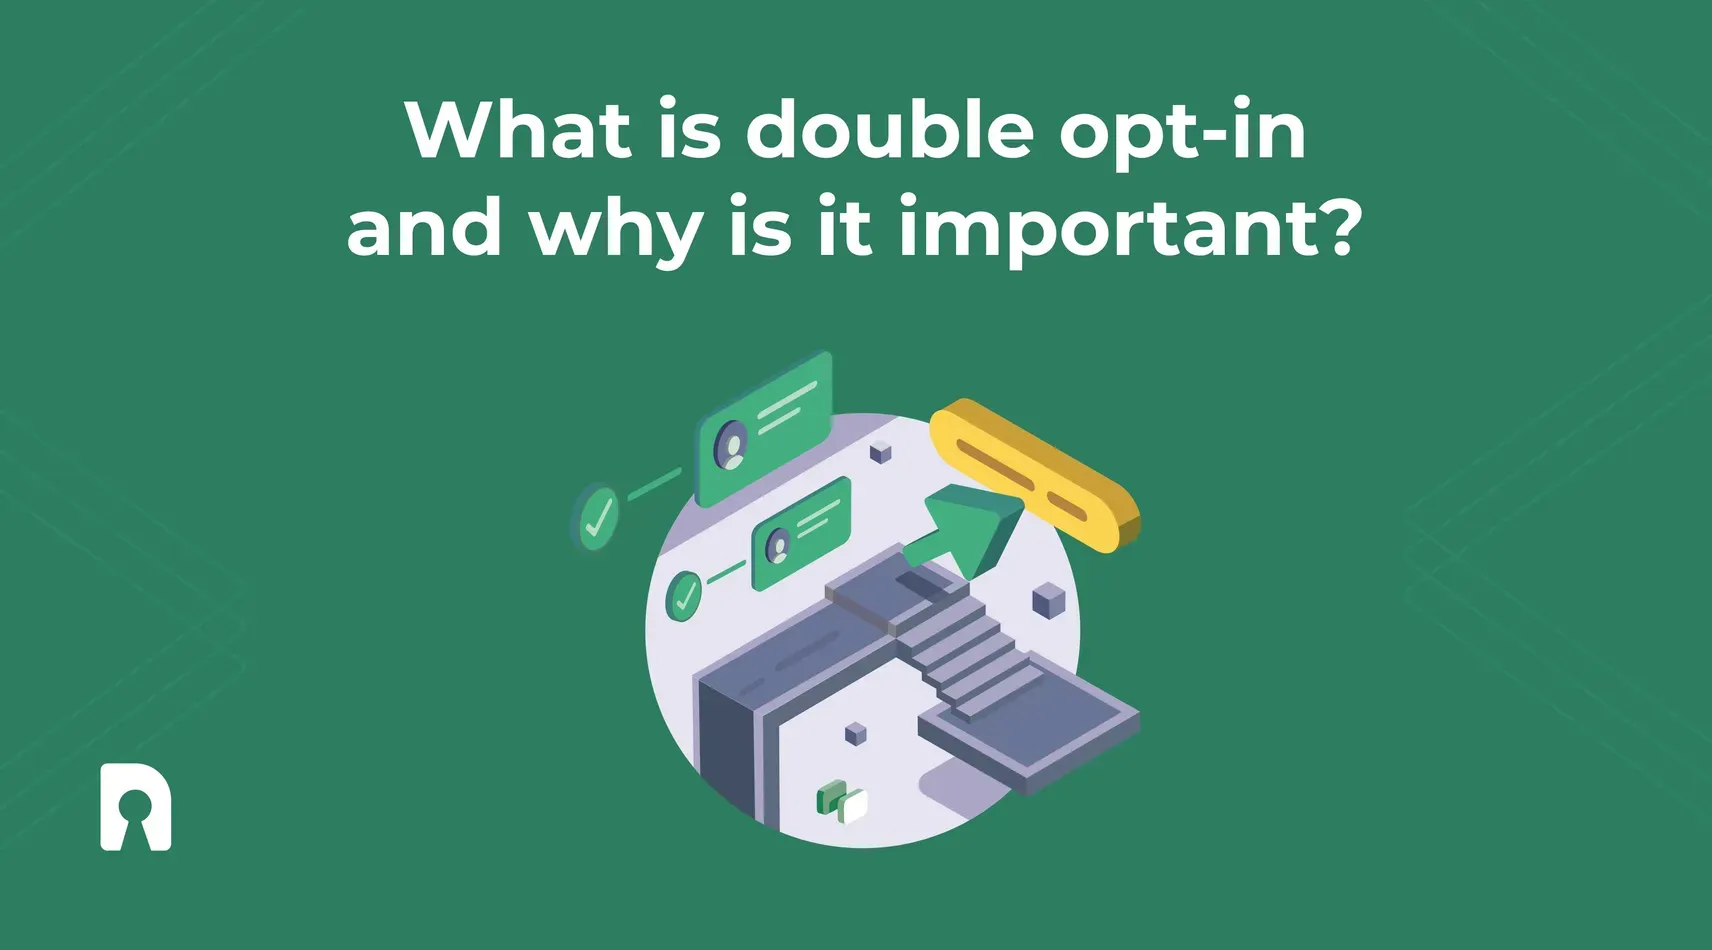 What is double opt-in and why is it important